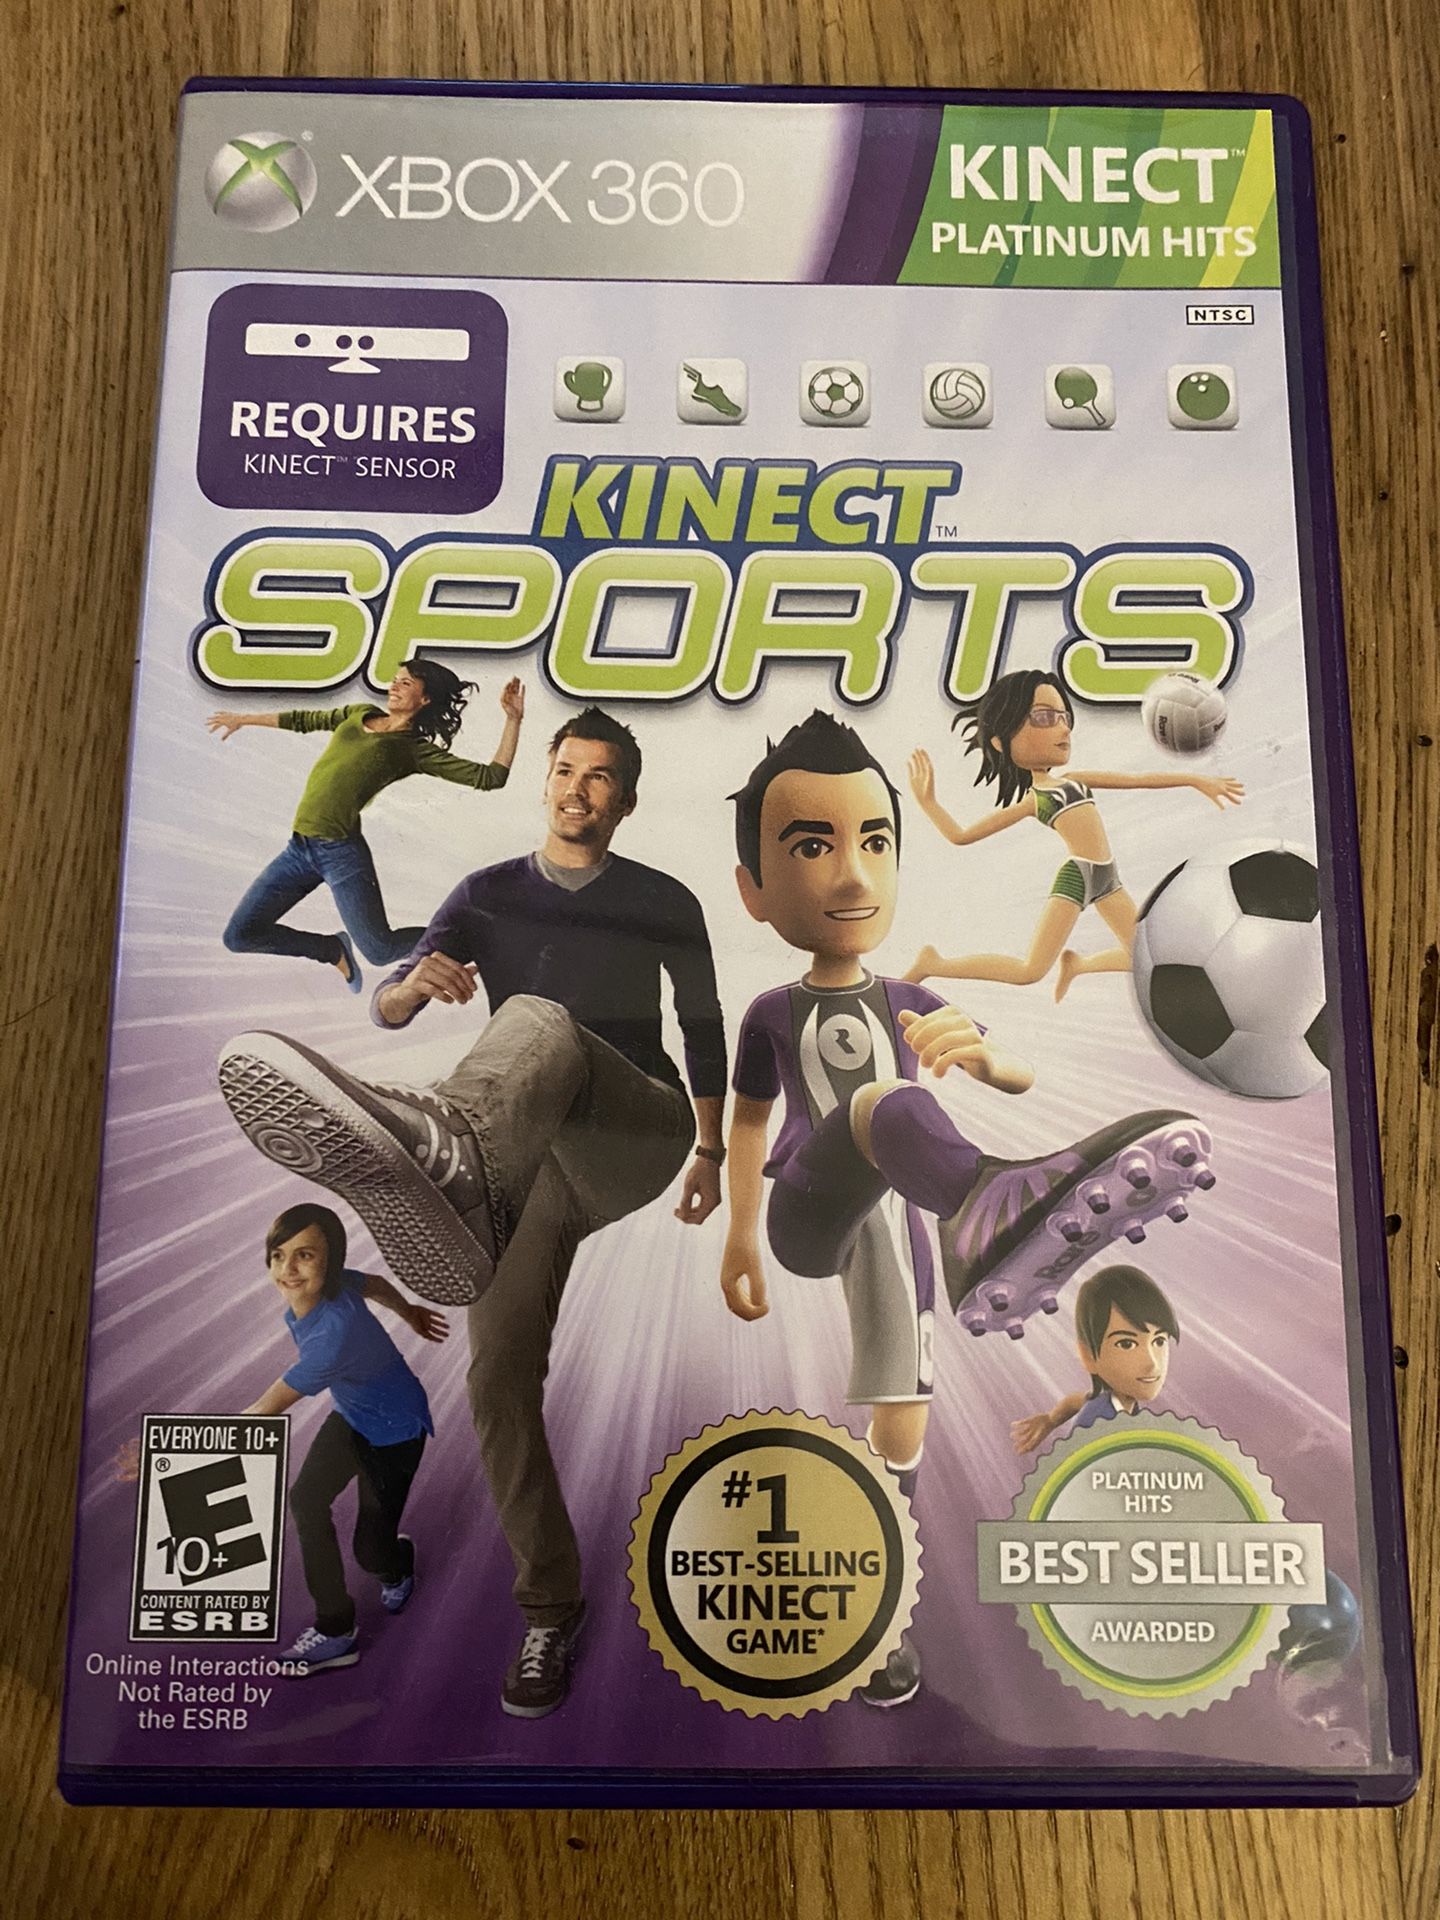 XBOX 360 Kinect Sports game